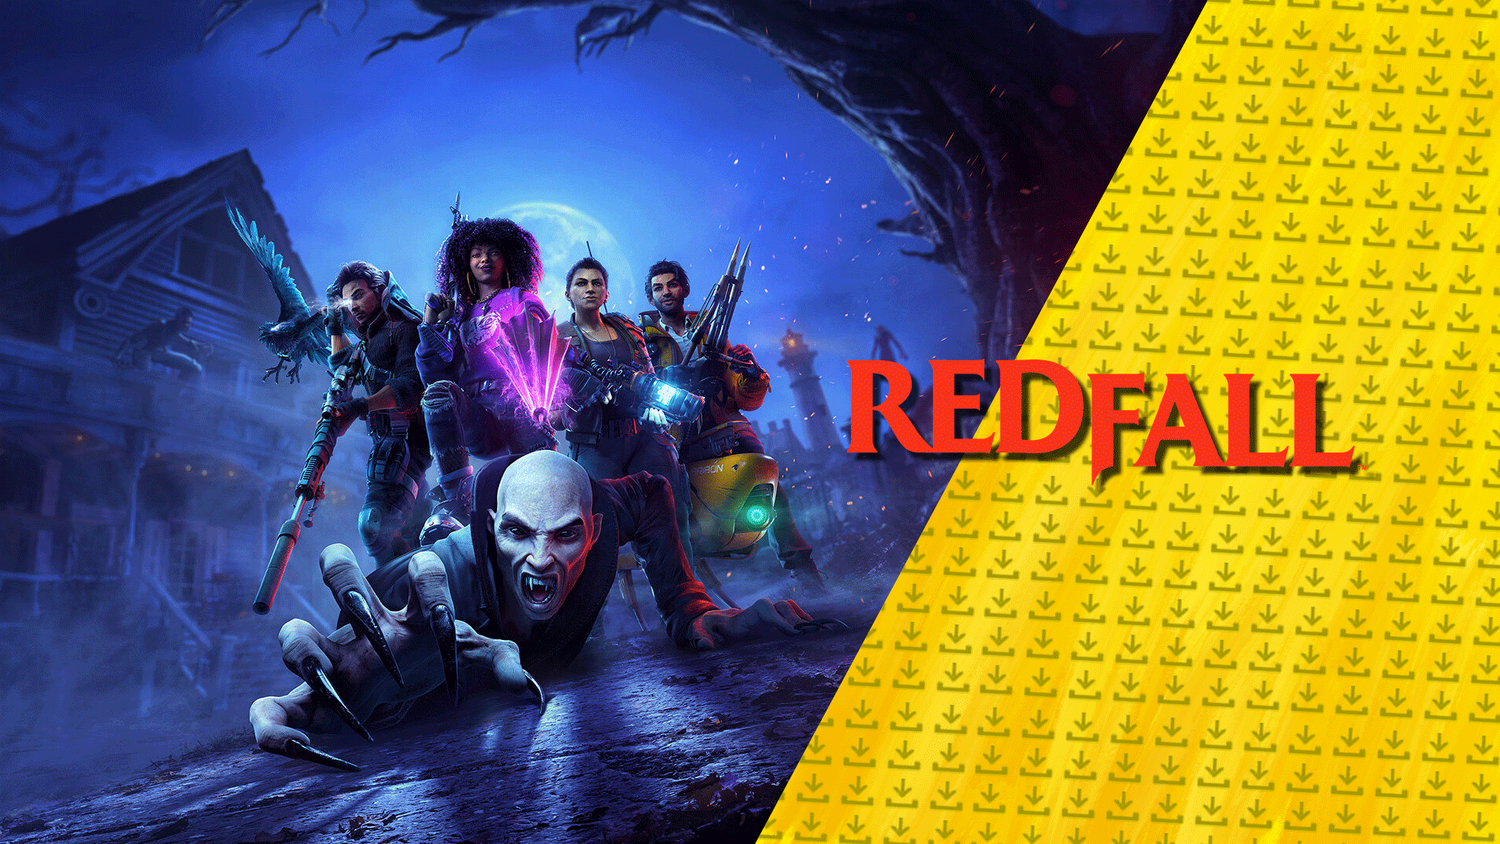 Redfall Game Update 3 Release Notes